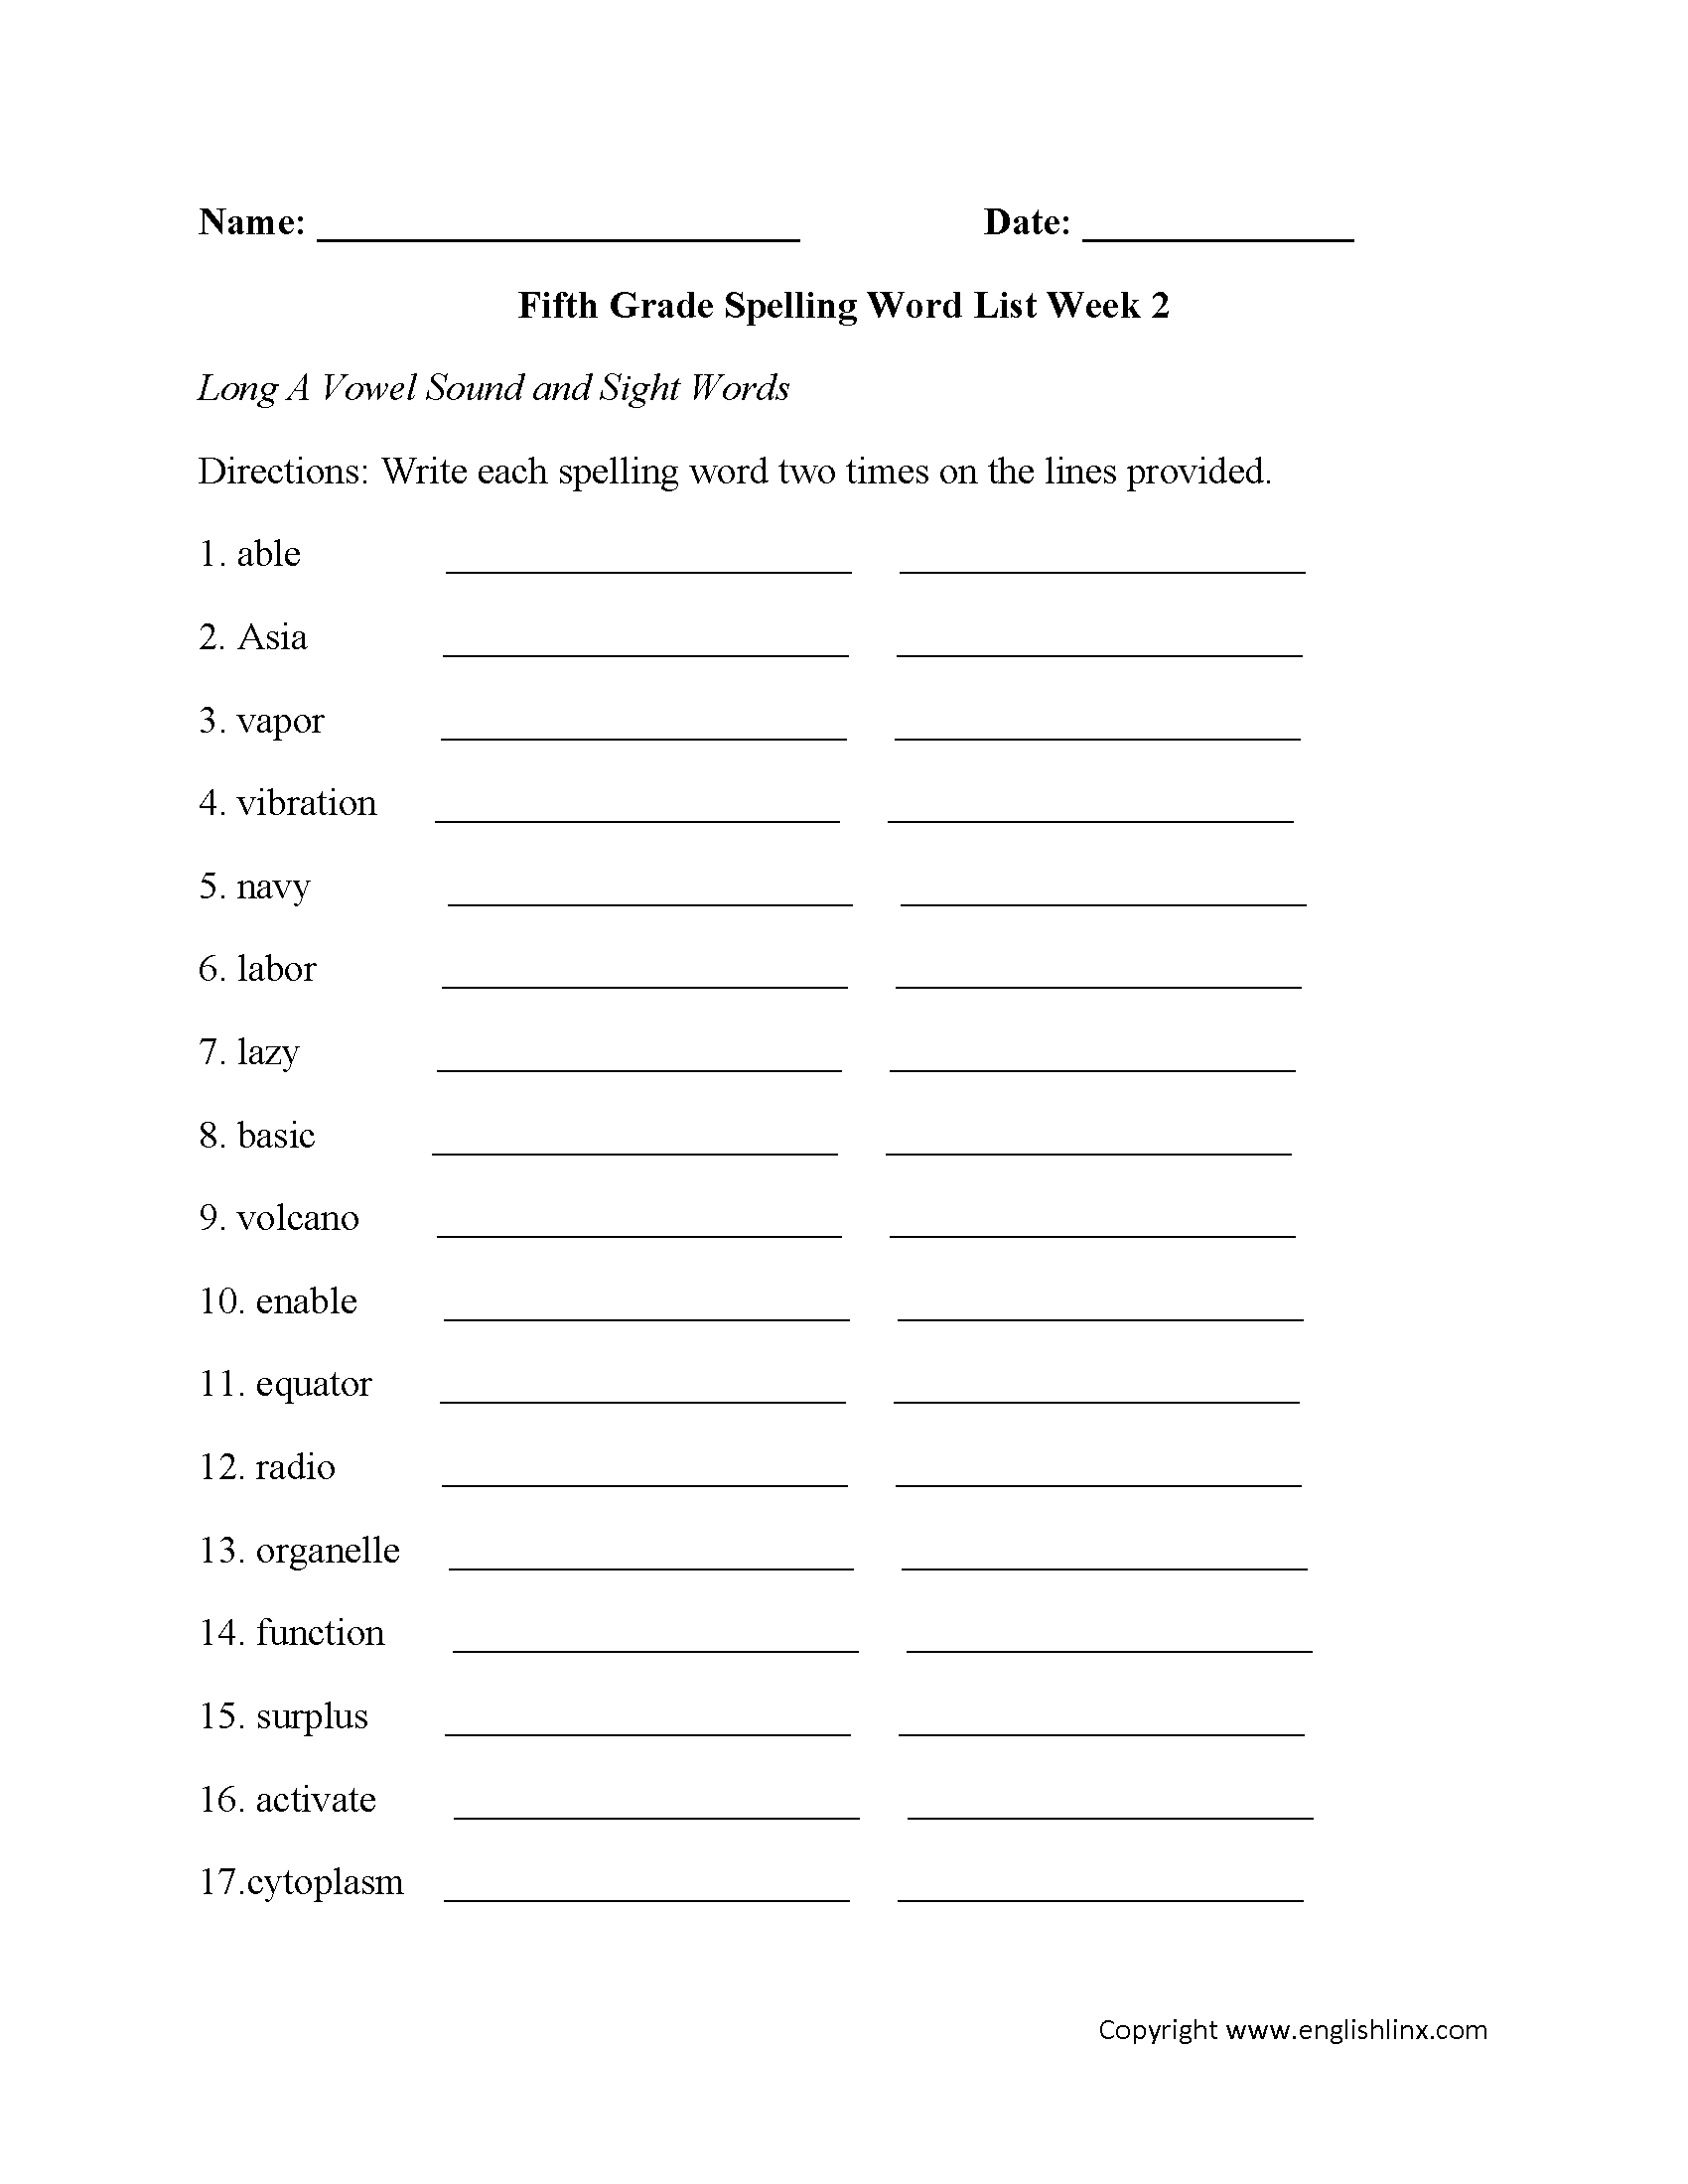 Week 2 Long A Vowel and Sight Words Fifth Grade Spelling Words Worksheets